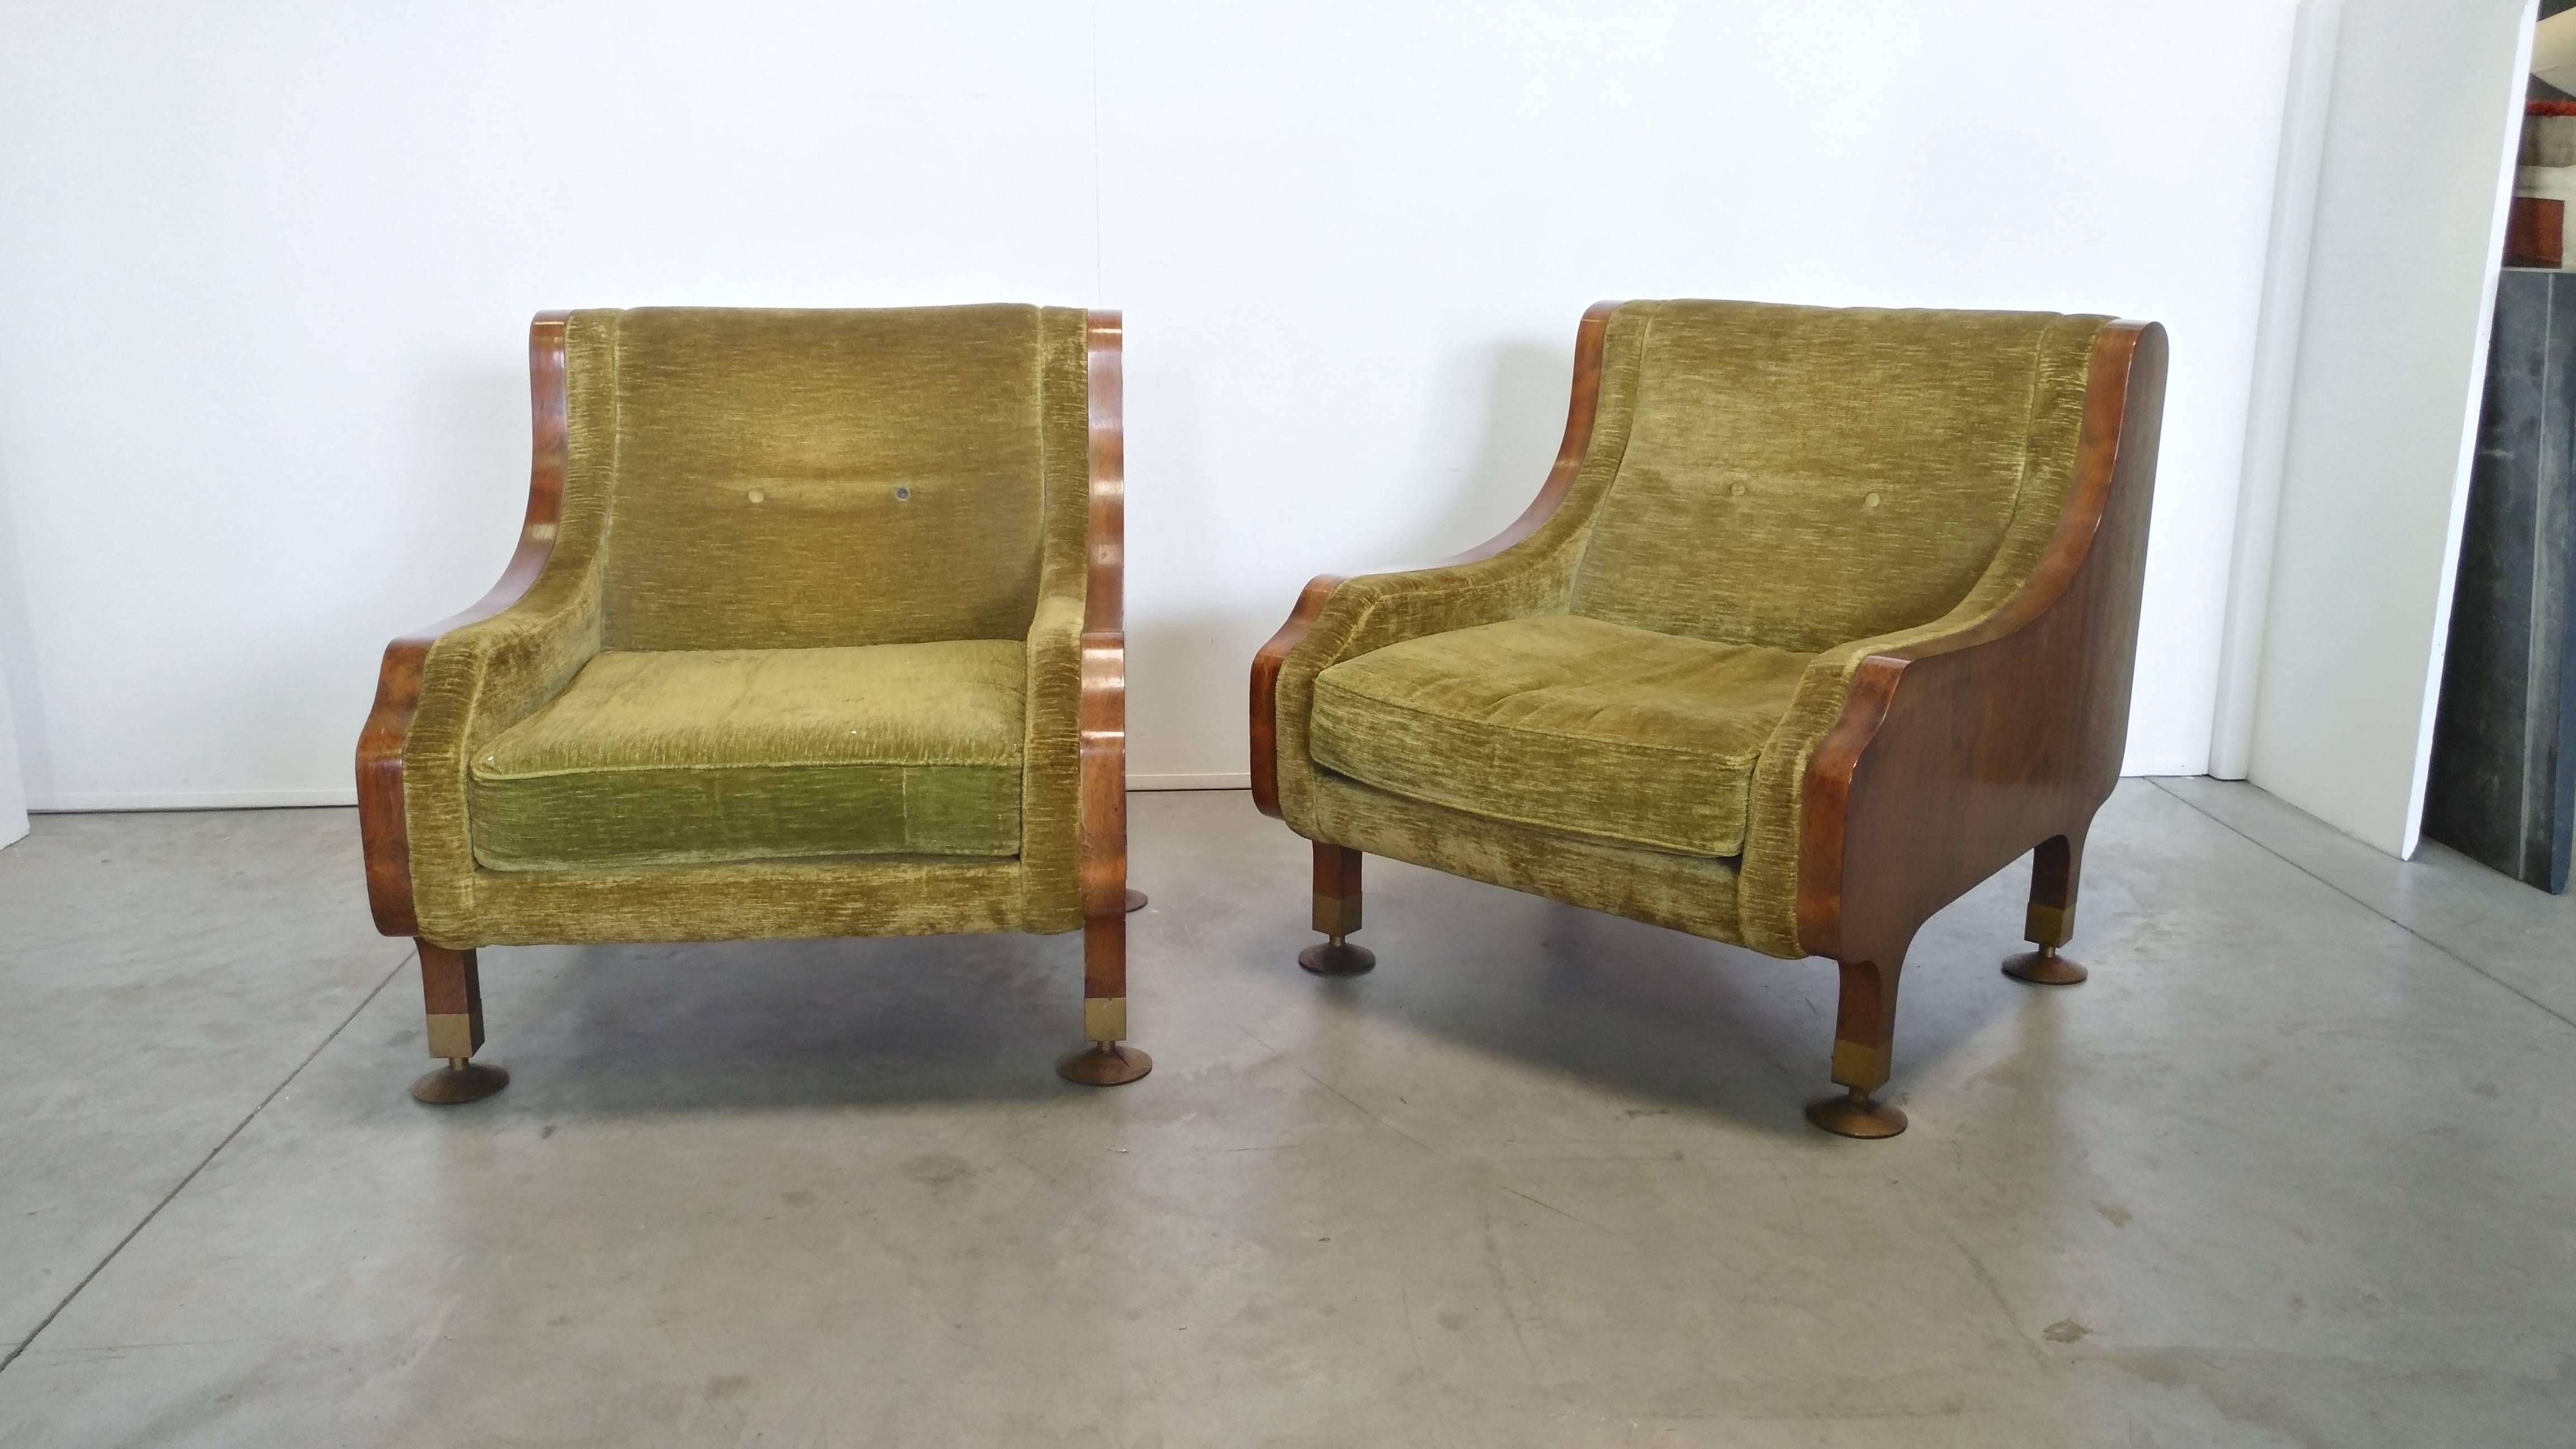 Beautiful set of large sofà and armchairs , rosewood flanks , brass feet with final wooden plate , green velvet fabric and upholstery in very good conditions 
We can attribute this armchairs and sofa to Marco Zanuso , because of the shape which